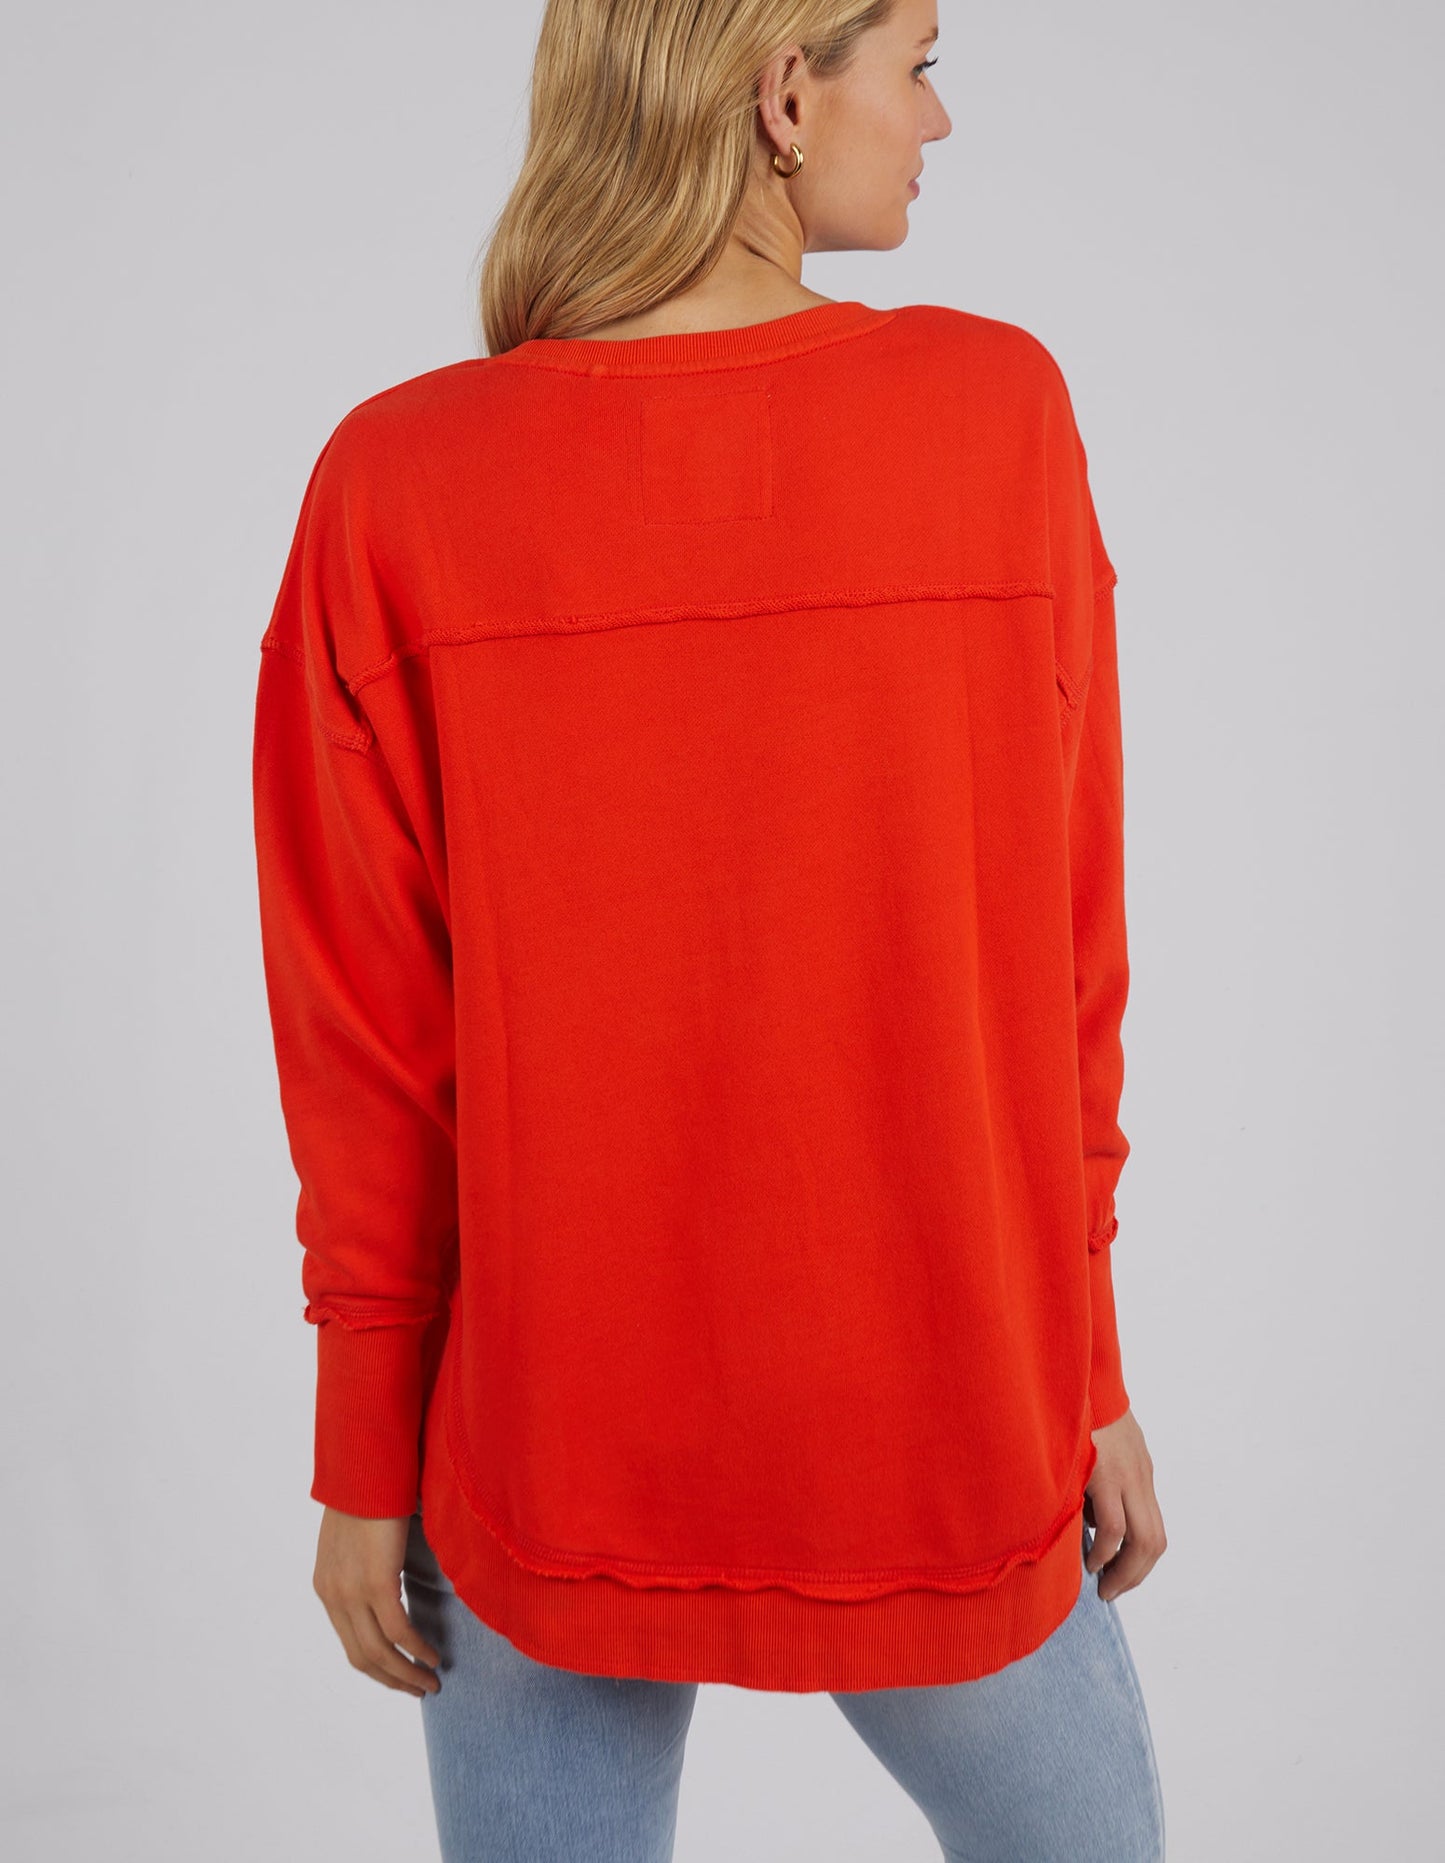 FOXWOOD SIMPLIFIED CREW - BRIGHT RED - THE VOGUE STORE